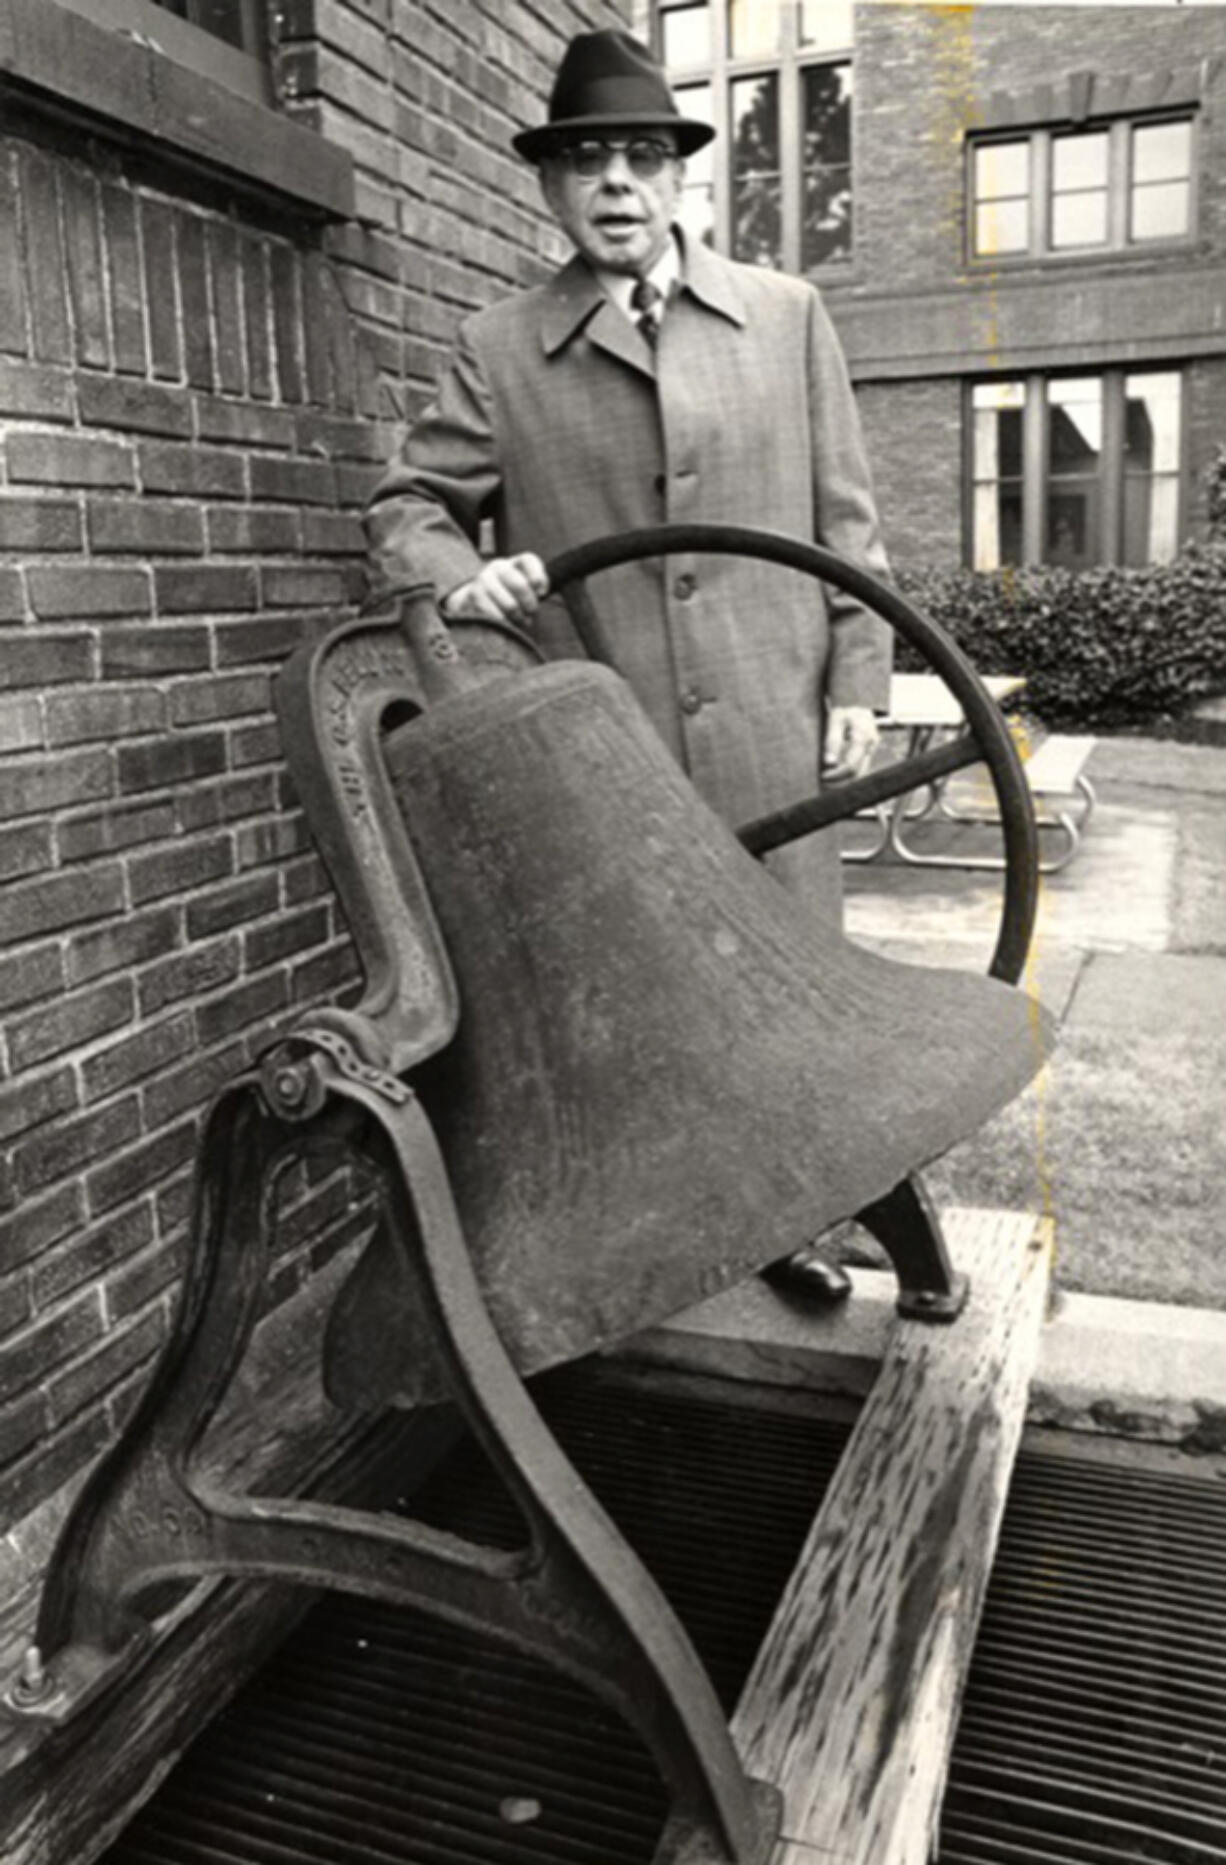 Although blind, Emil Fries (pronounced "freeze") founded The Piano Hospital in 1949 and directed it until 1997. He stands next to the dinner bell that once rang students to meals. Students from around the world sought out his tuning technique that harmonized hands and ears to tune pianos.